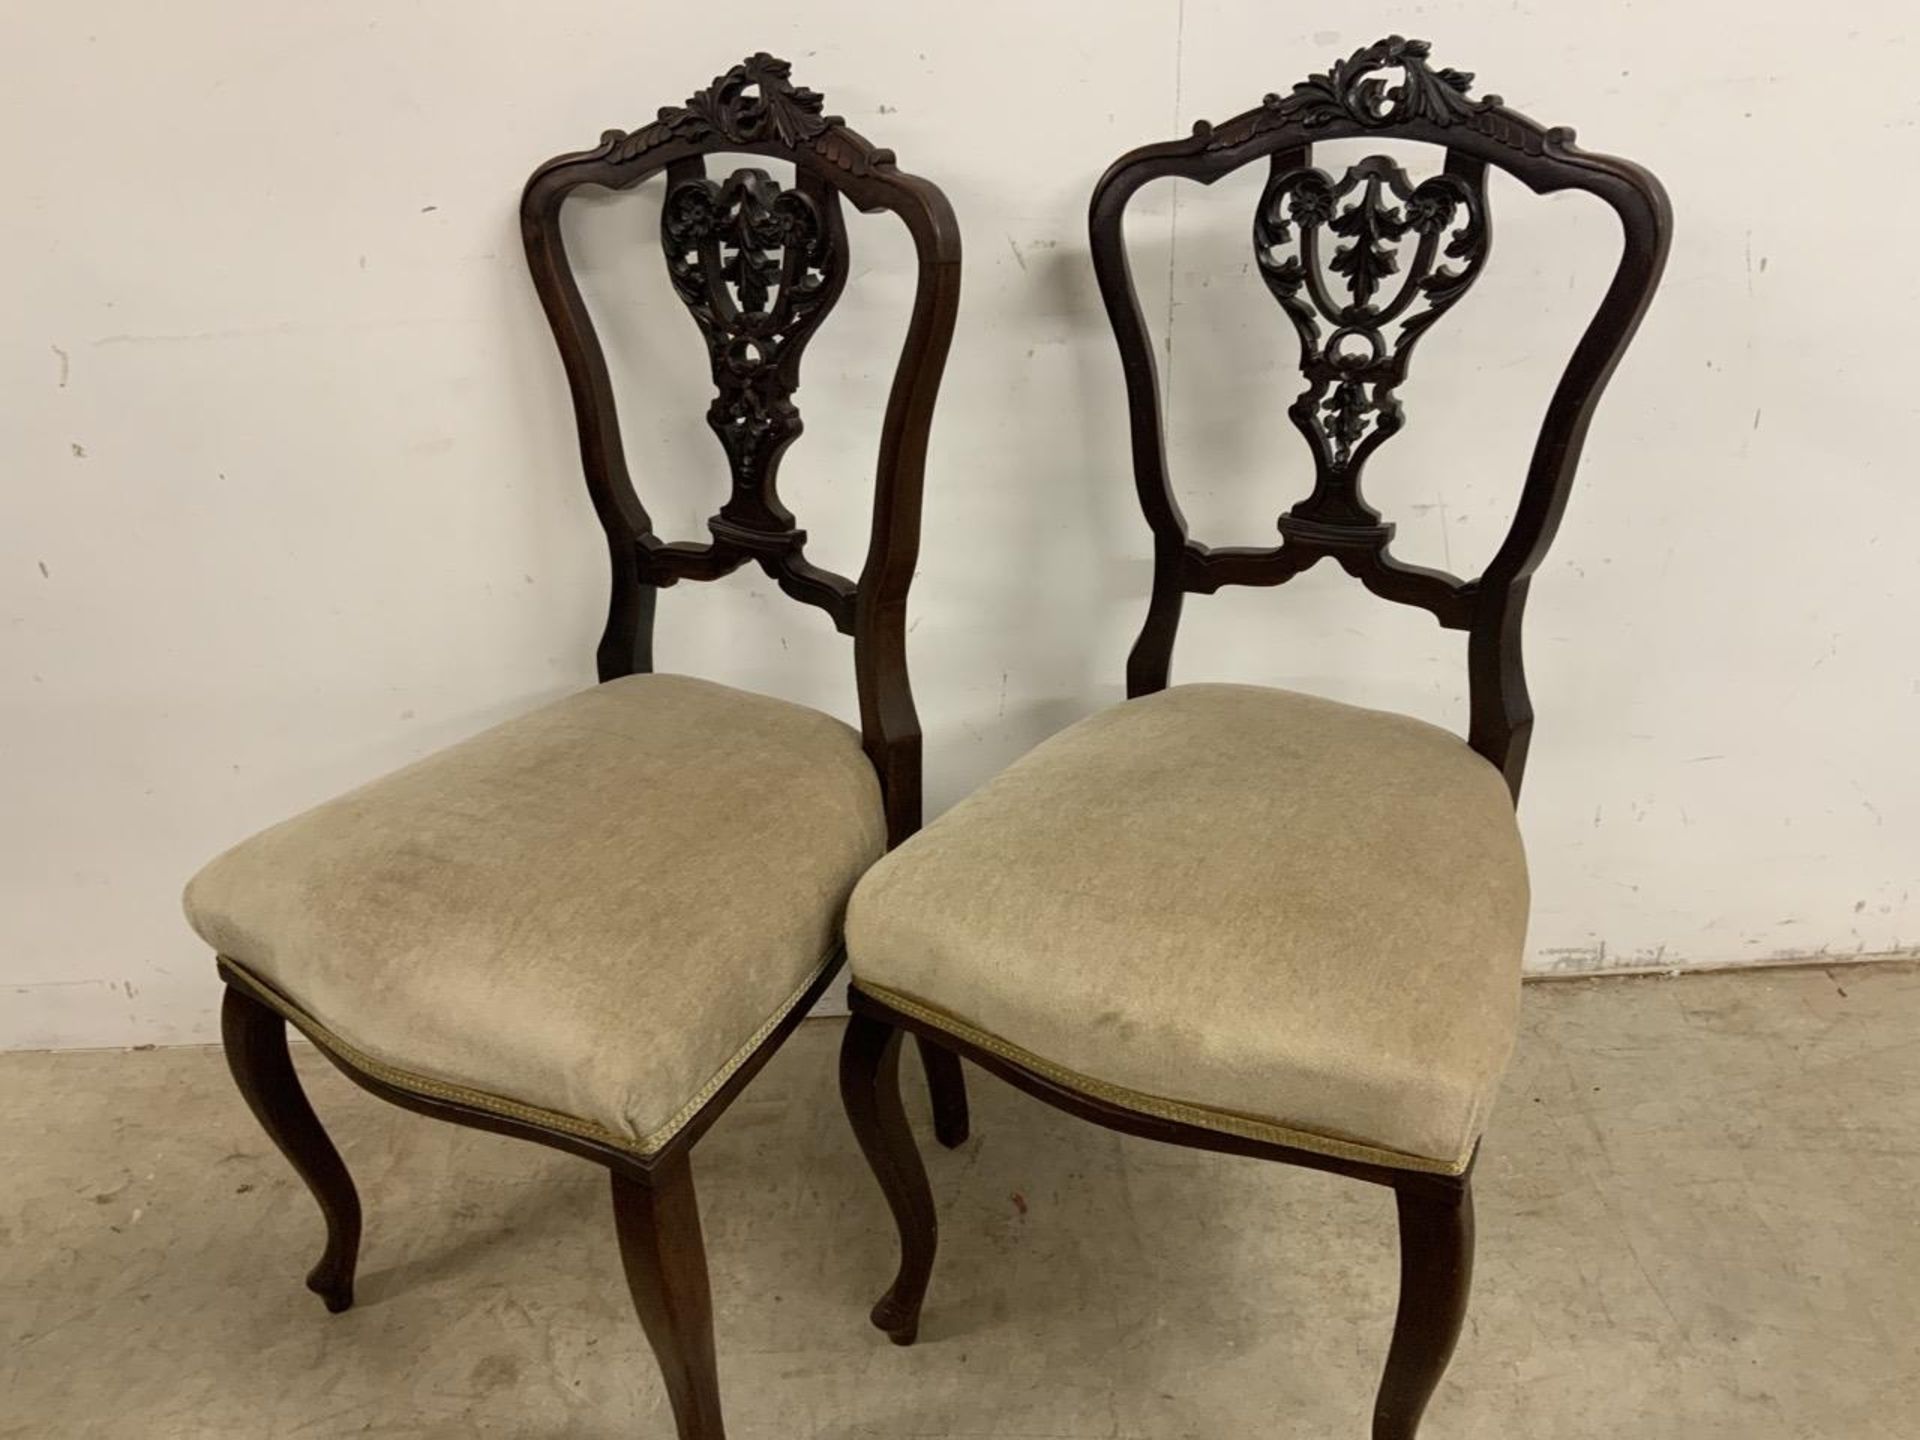 An Elegant Set of 4 Victorian Dining Chairs Elaborately Carved Top Rail And Shield Backs The Seats - Image 2 of 17